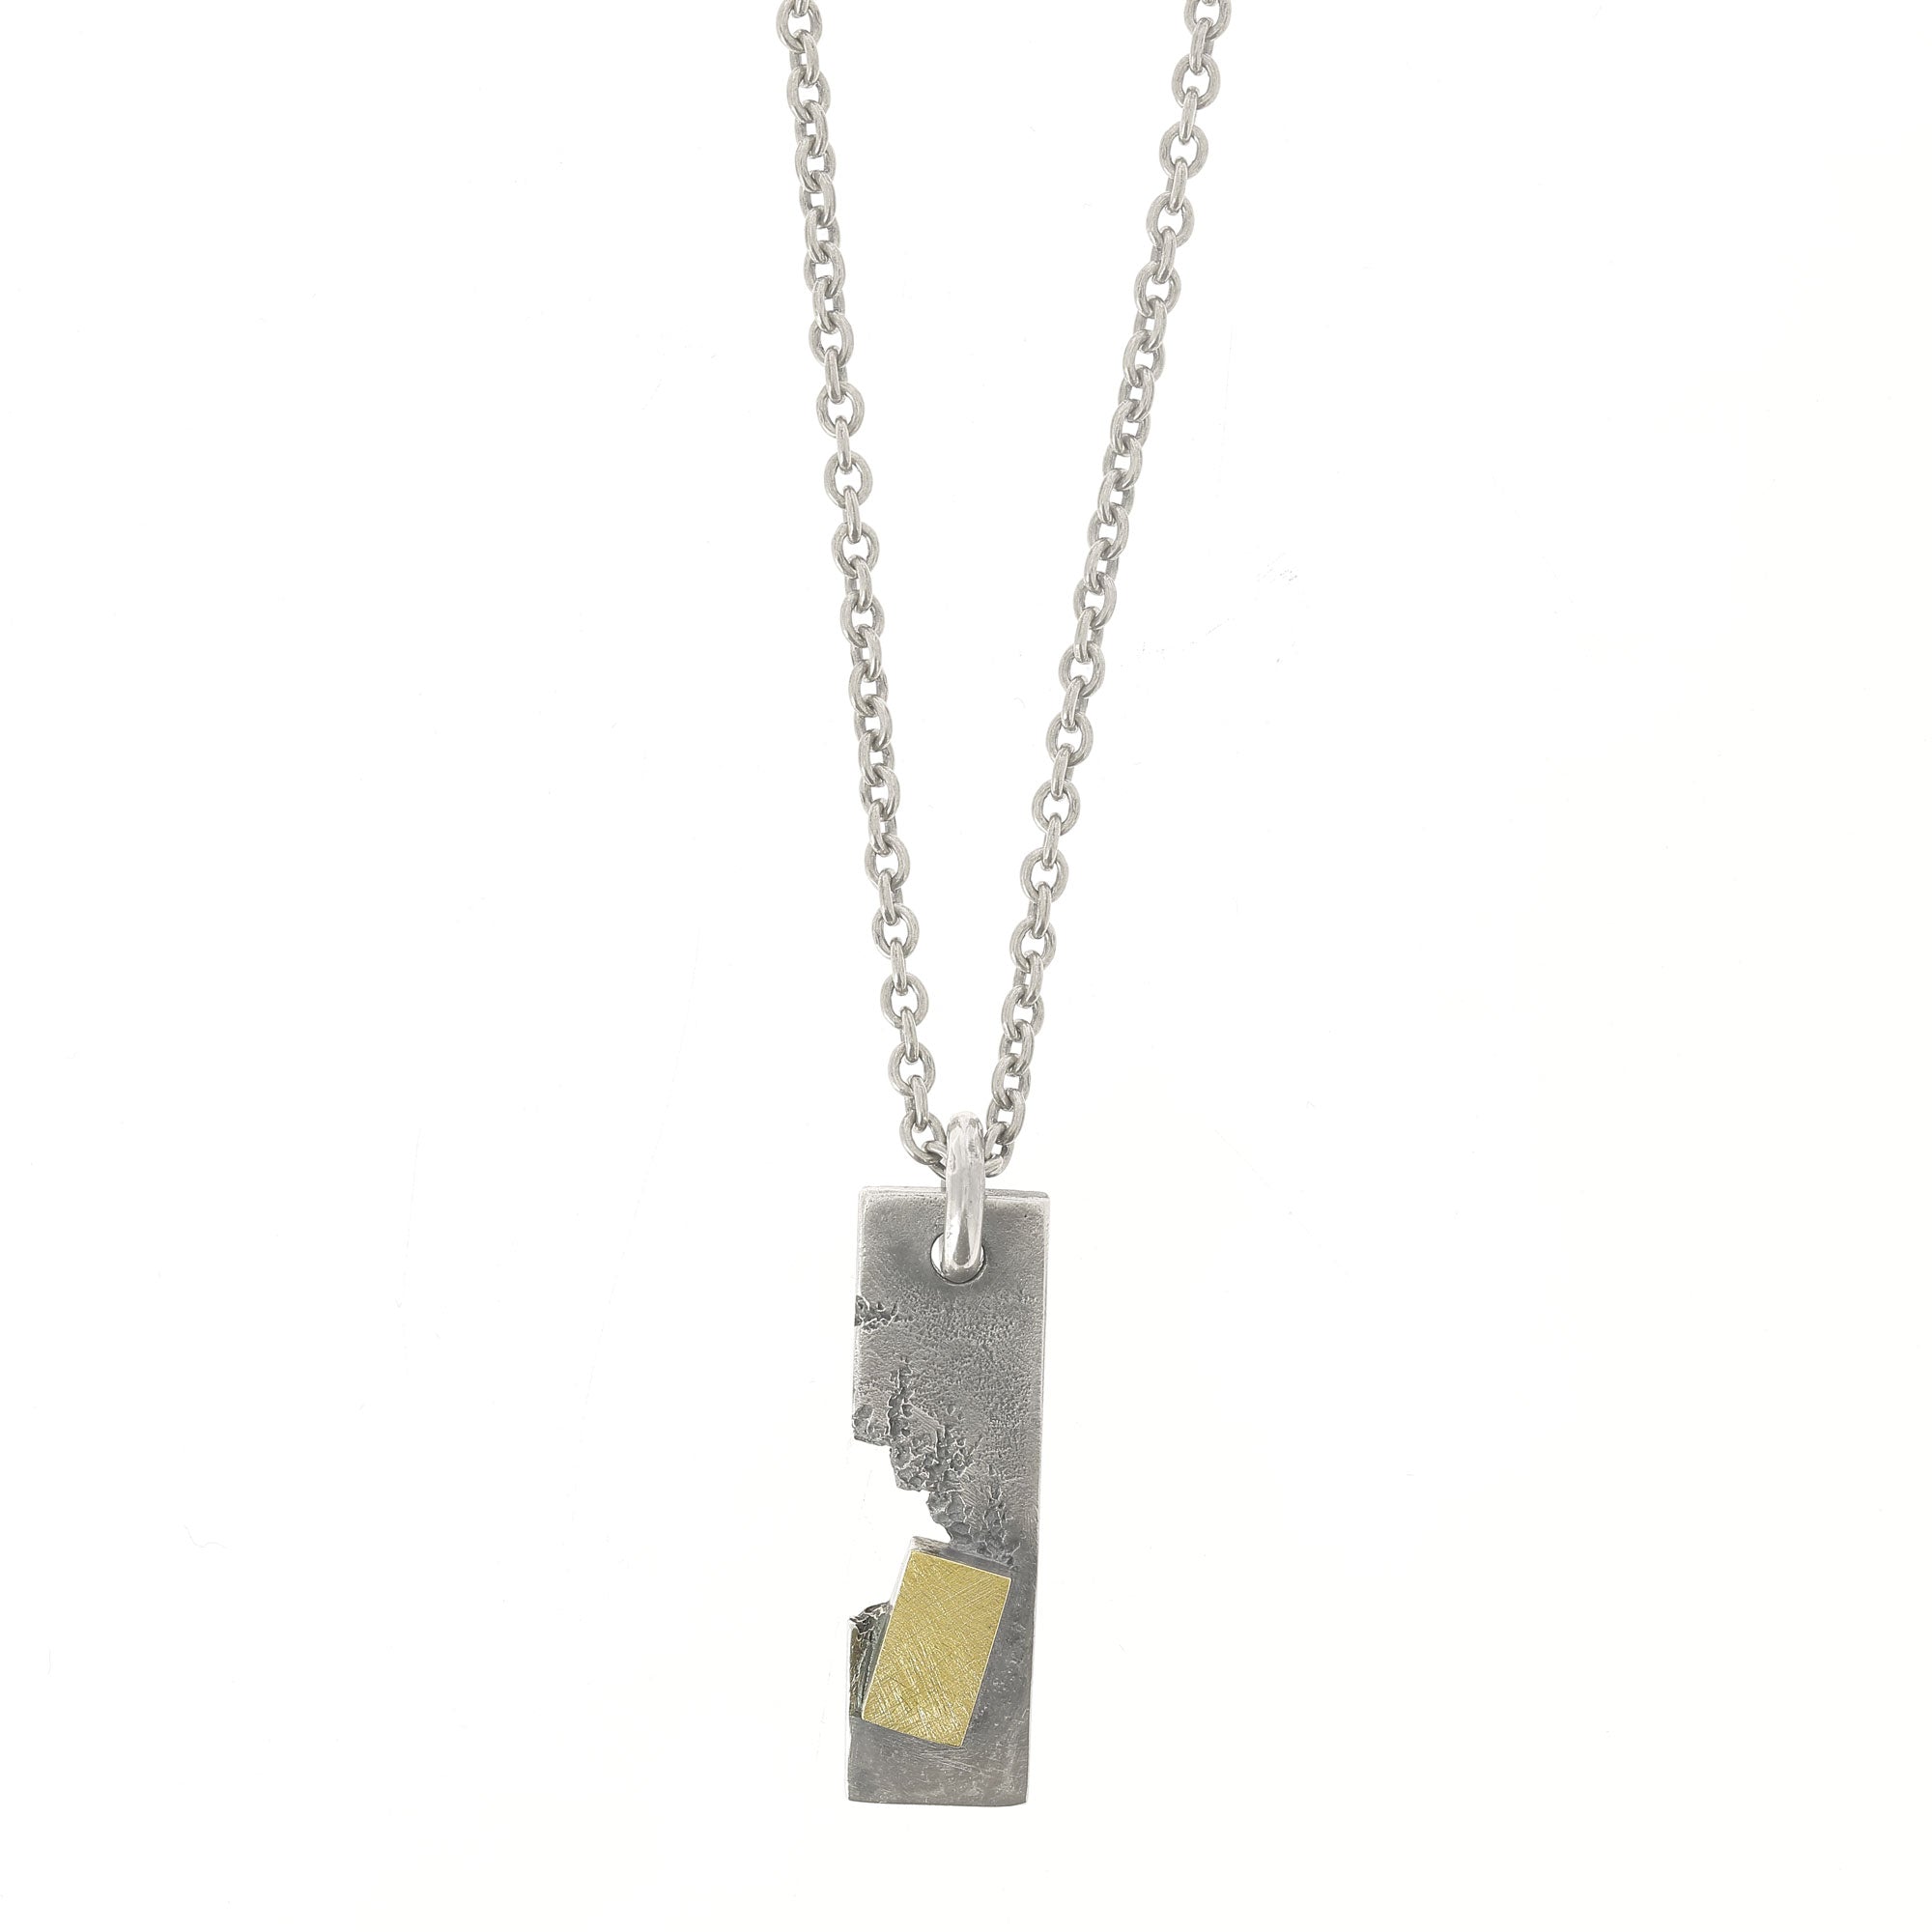 Rotten G Plate Necklace